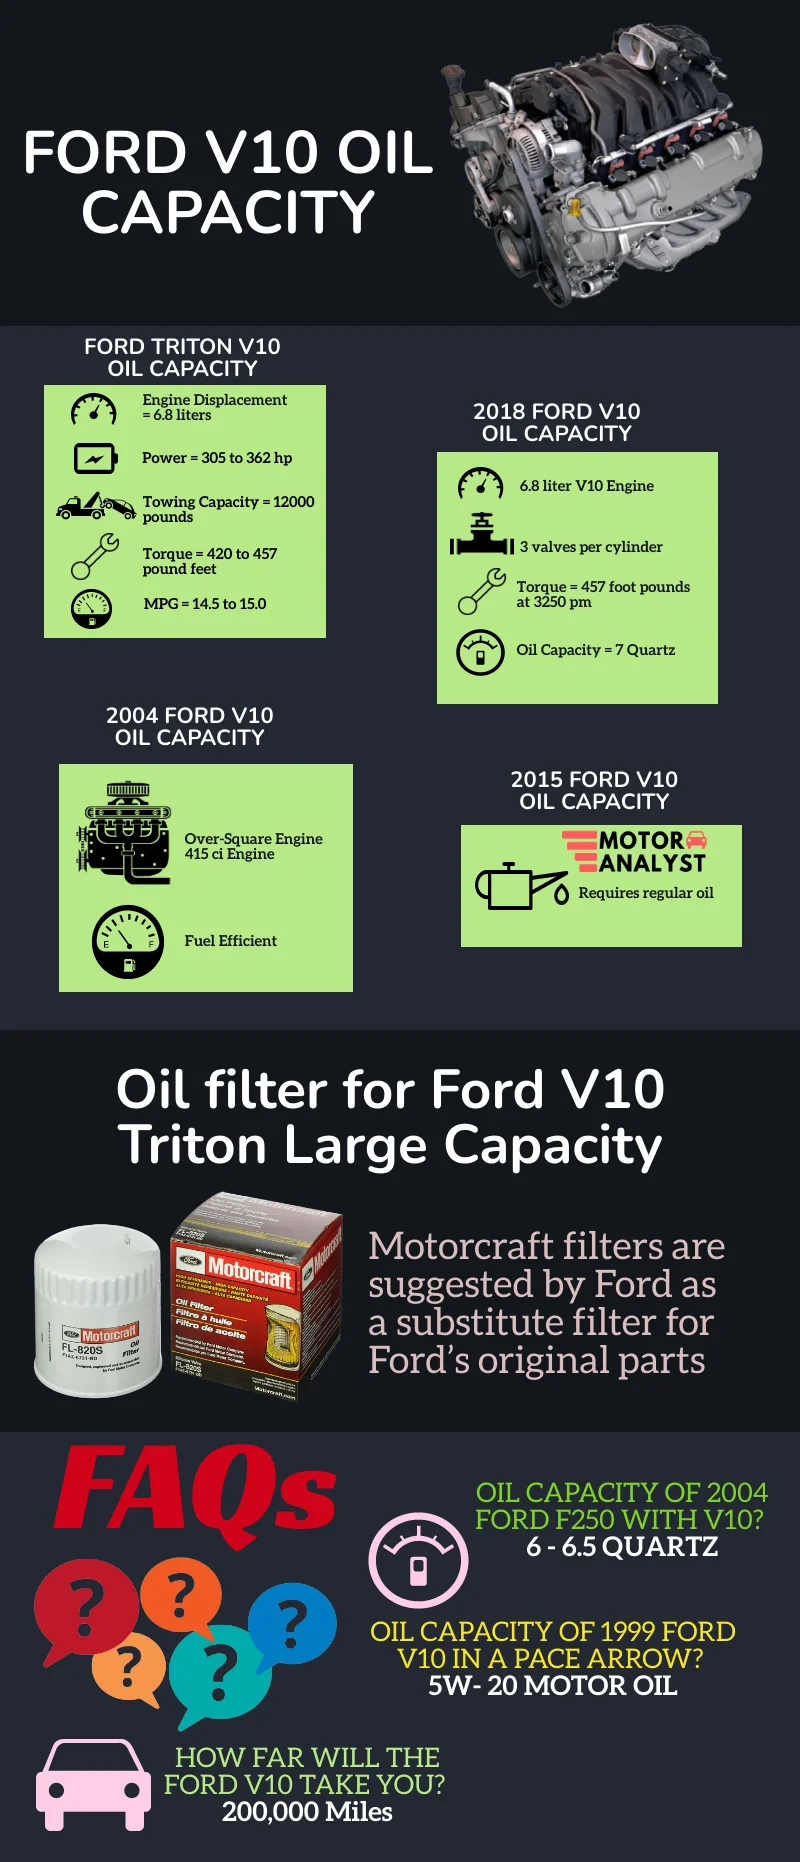 Ford V10 Oil Capacity The Important Feature for Vehicle Specifications